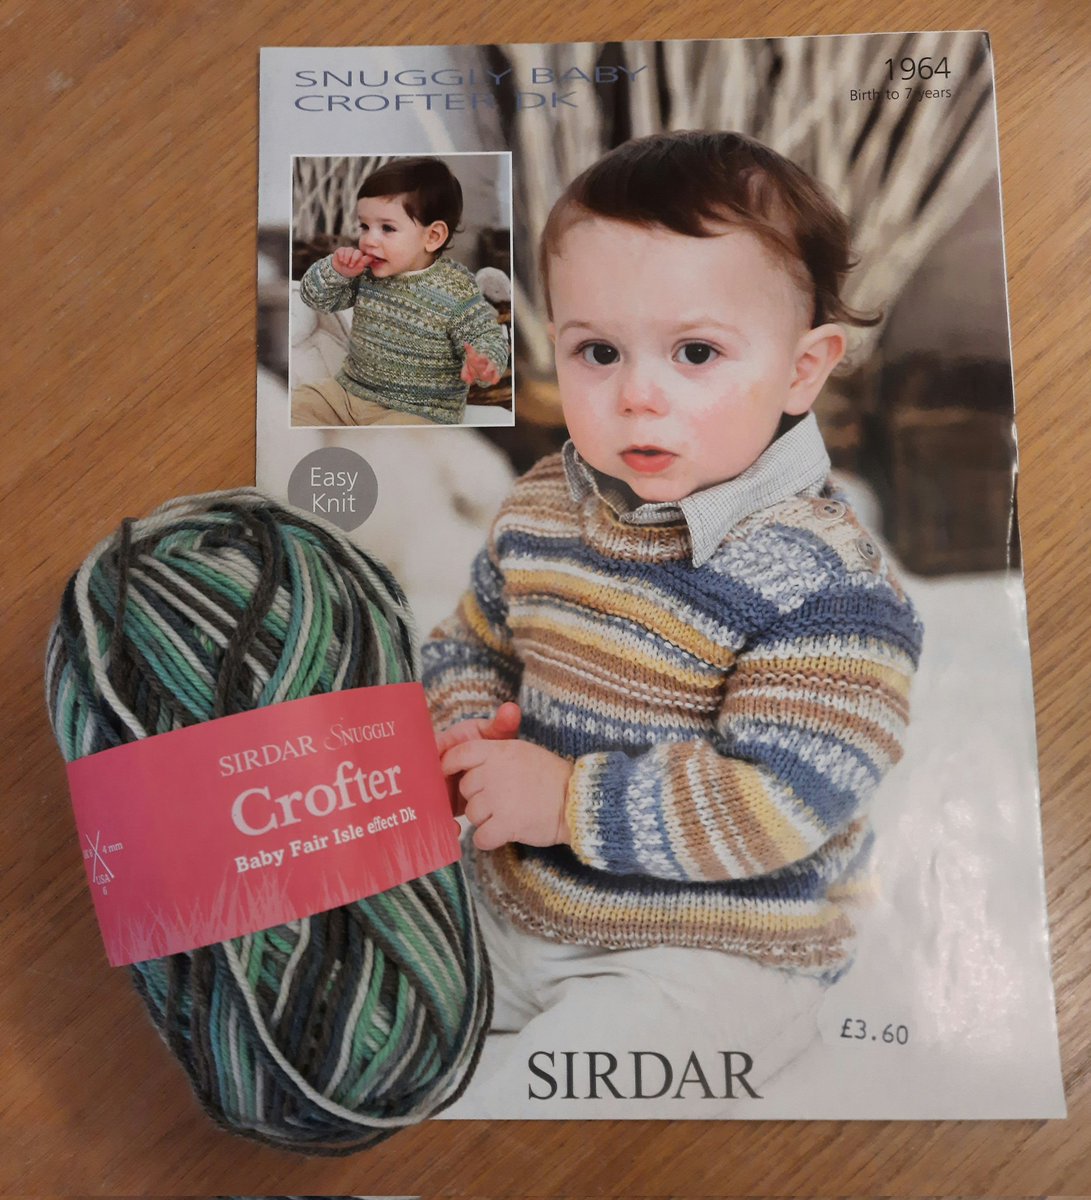 How cute is this jumper 😍 SIRDAR Snuggly Crofter DK This yarn gives you the Fair Isle #thelostsheepwoolshop #sirdar #sirdarsnuggly #sirdarsnugglycrofter #babyyarn #fairisleeffect #sirdarcrofter #babyknits #babyknittingpatterns #babydk #babyknitting #babyjumper #knitting